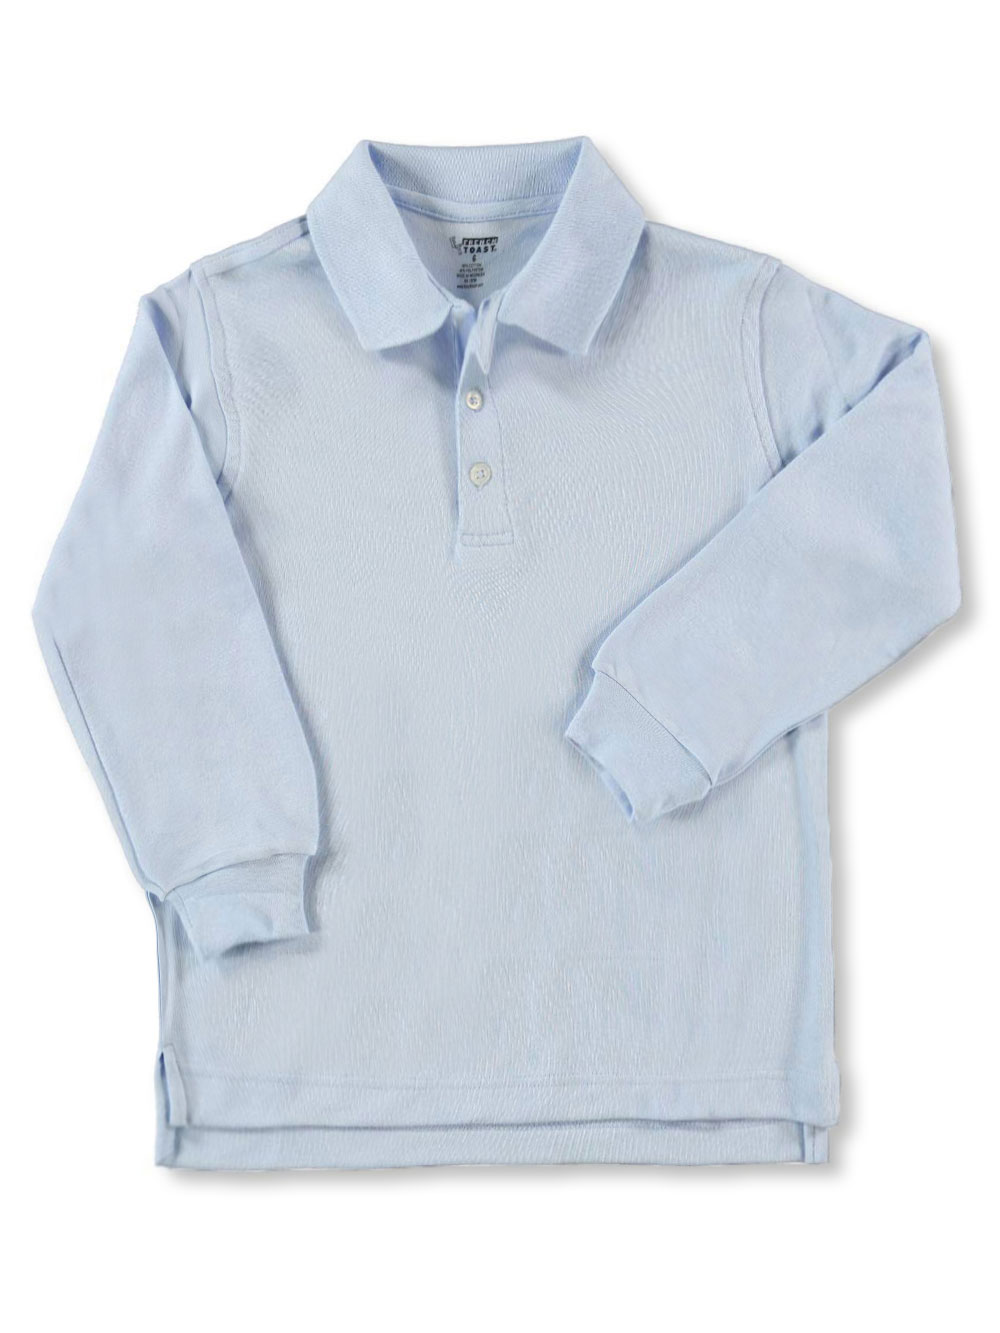 Size 6 Knit Polos for Boys